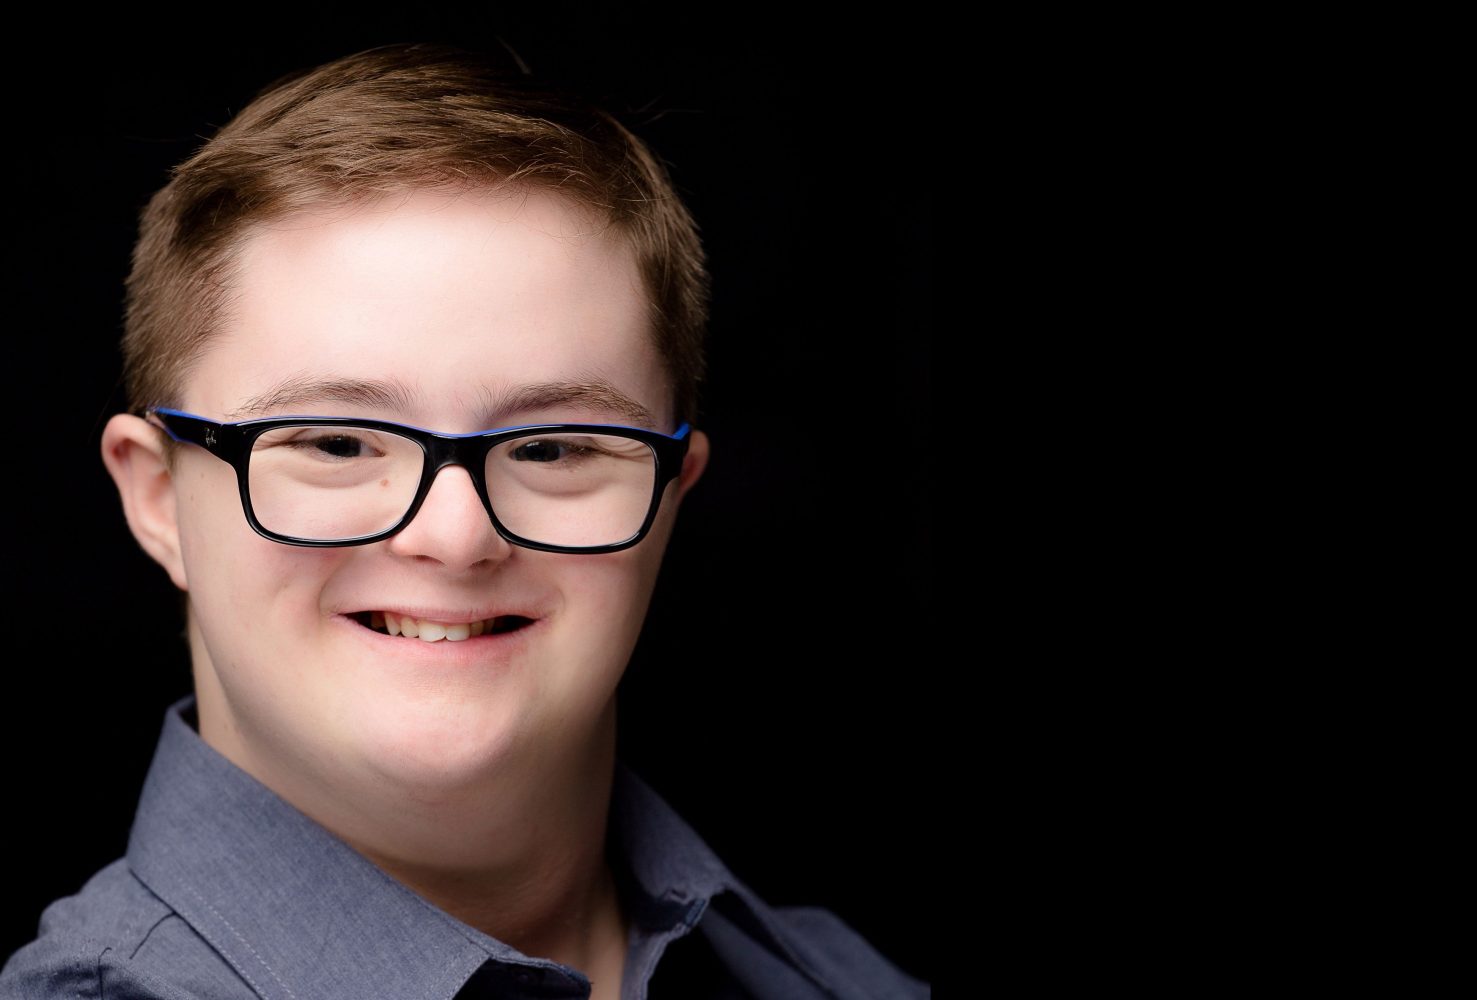 Headshot of an actor with Down syndrome